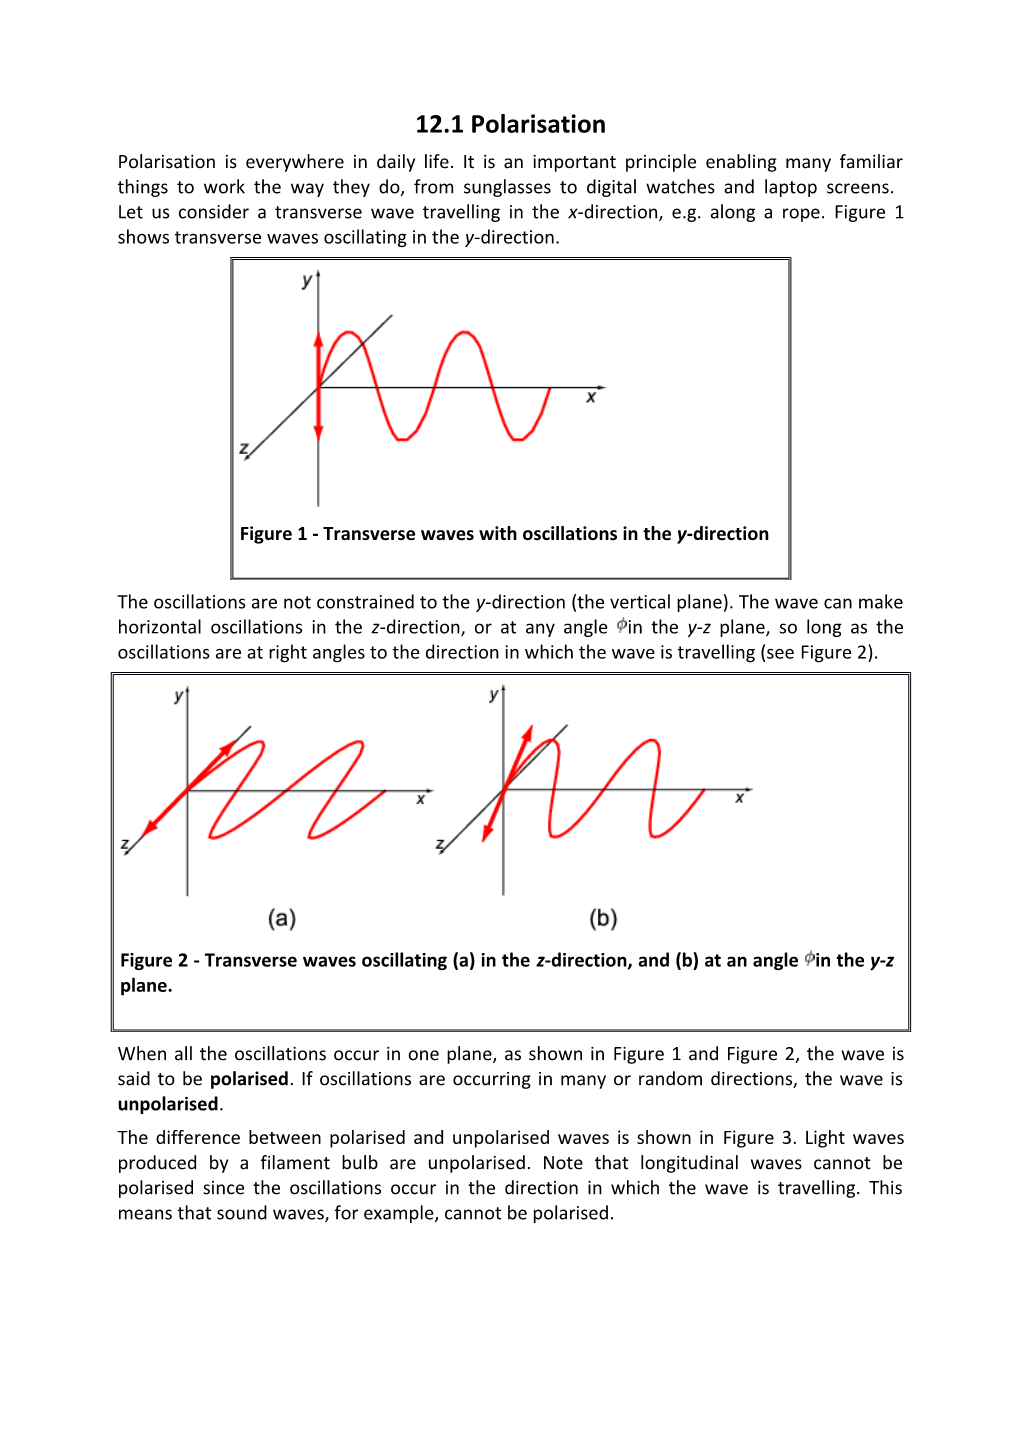 Let Us Consider a Transverse Wave Travelling in the X-Direction